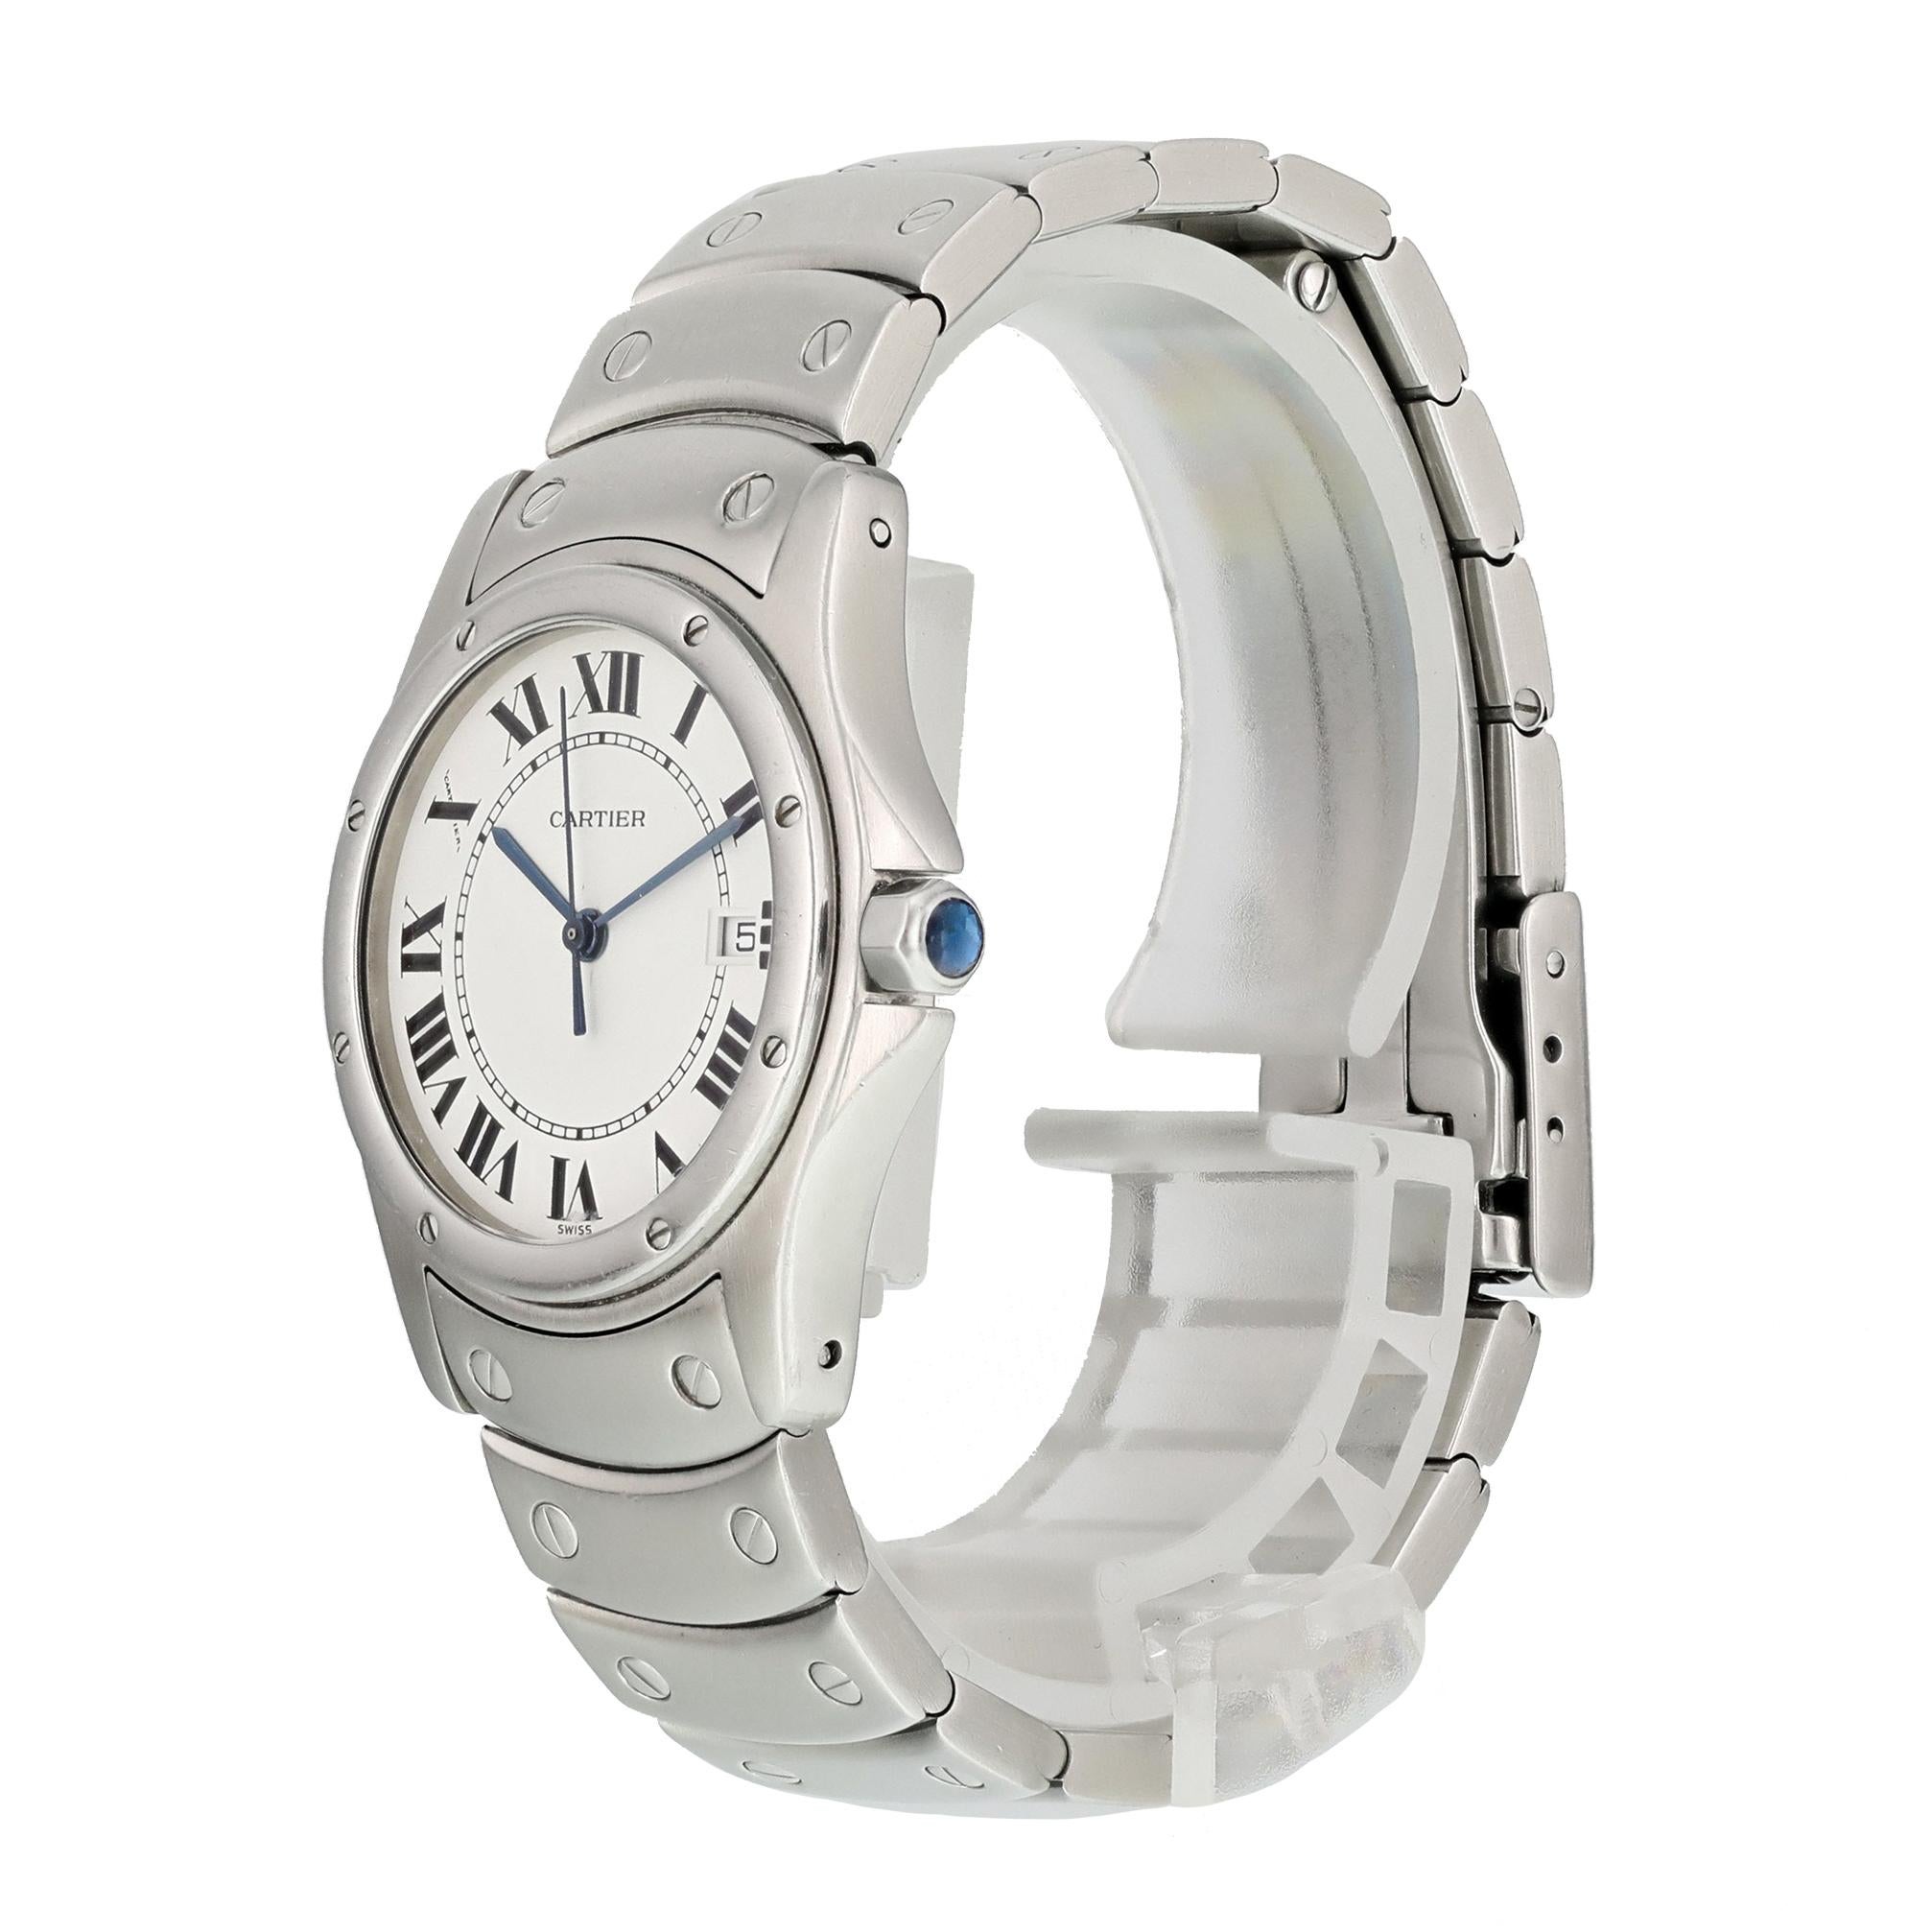 Cartier Santos Ronde 1561 Ladies Watch.
29mm Stainless Steel case. 
Stainless Steel smooth bezel. 
White dial with blue steel hands and Roman numeral hour markers. 
Minute markers on the outer dial. 
Date display at the 3 o'clock position.